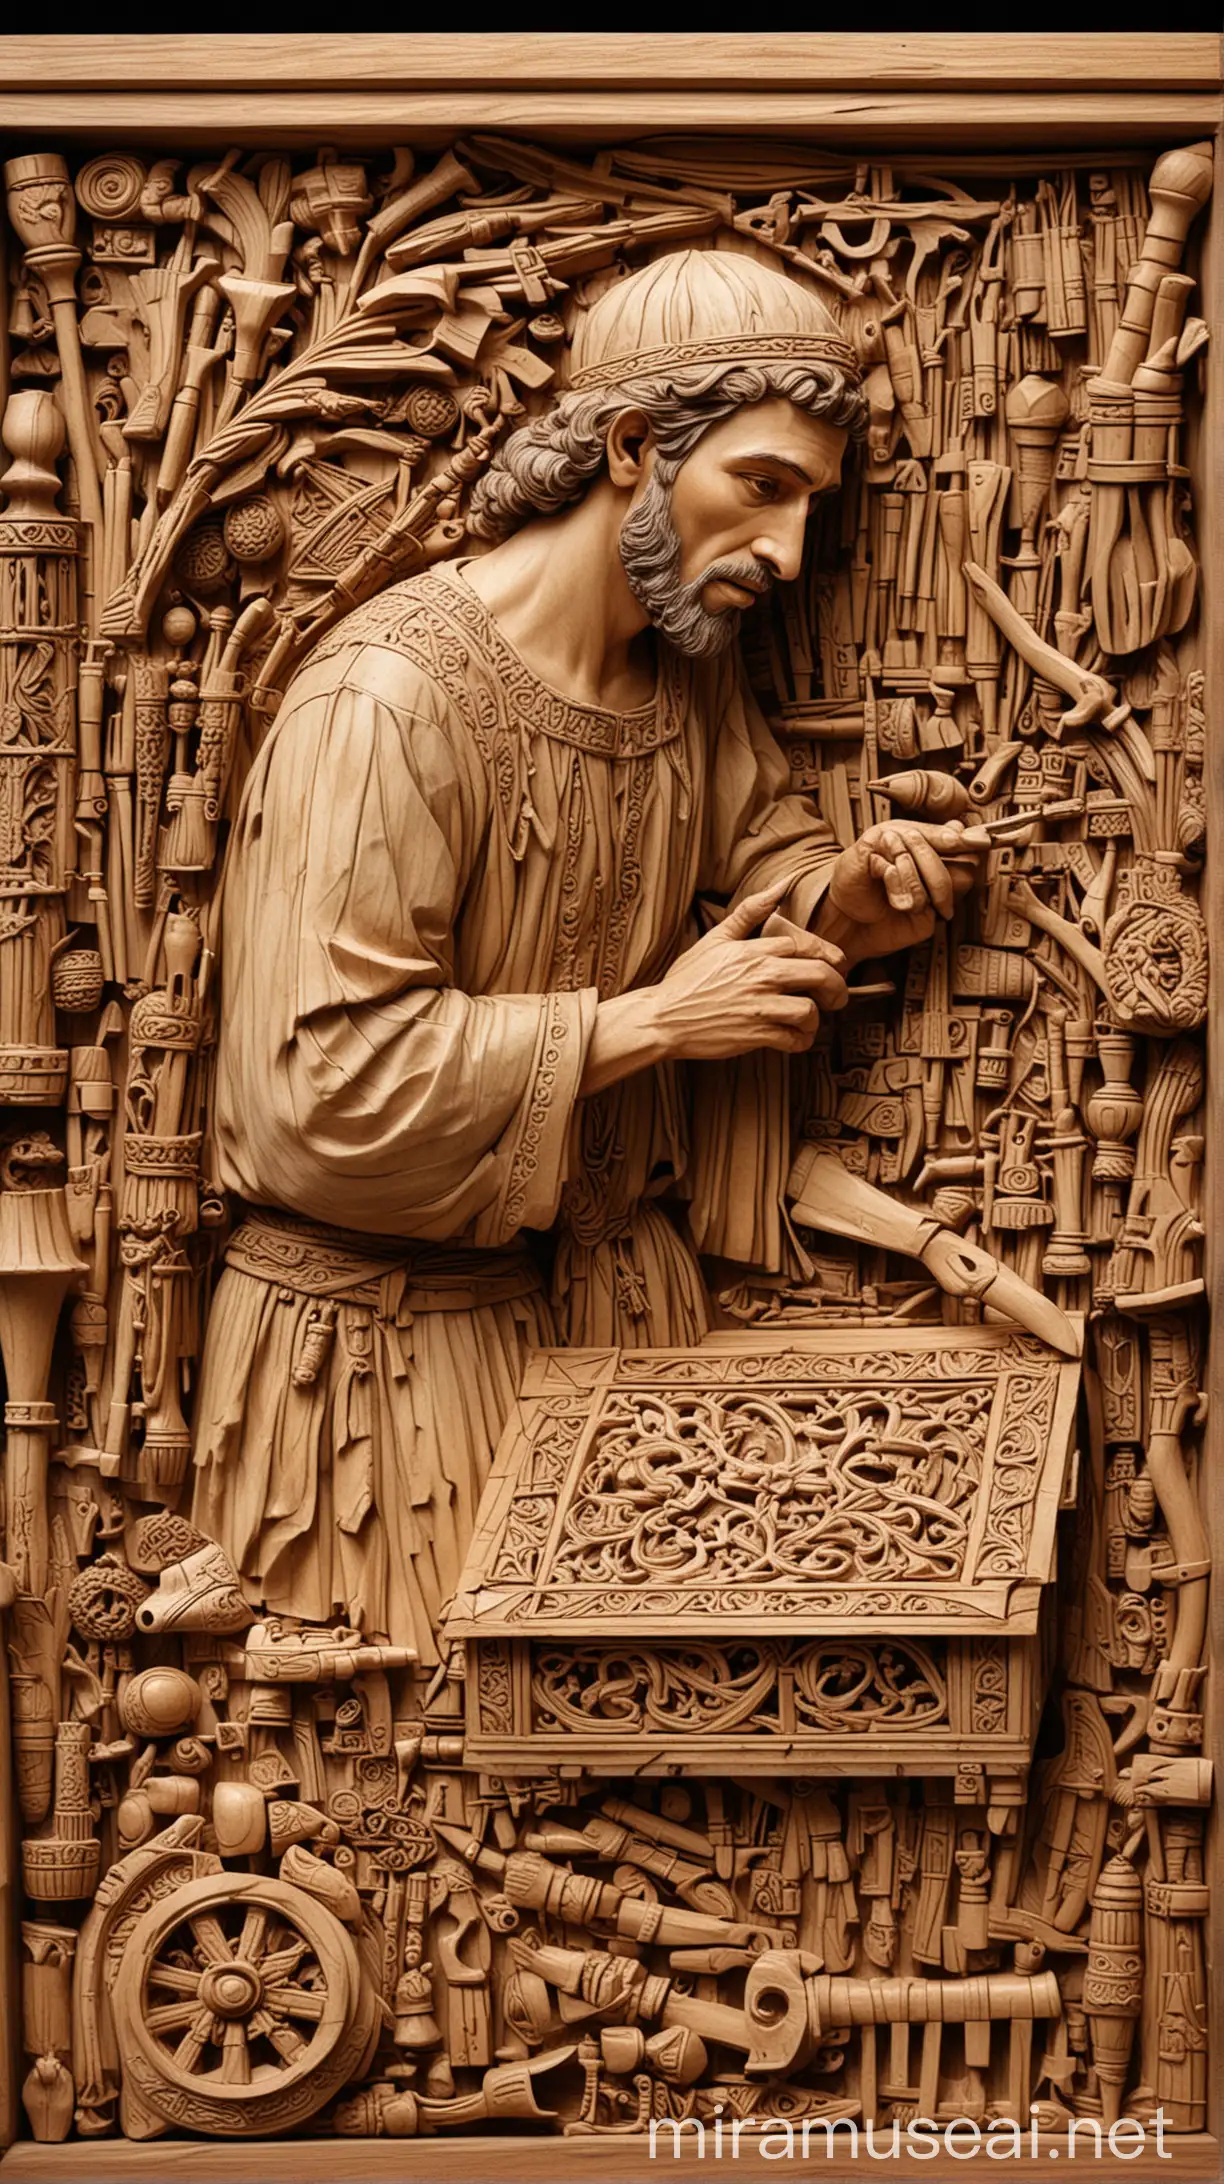 A medieval-style illustration of a skilled craftsman, Bezaleel, working on a intricately carved wooden box, with various tools and materials surrounding him."
Show image at: "In the 13th century BC, a skilled artisan named Bezaleel, son of Uri and member of the tribe of Judah, emerged as a master craftsman in his time."In ancient world 